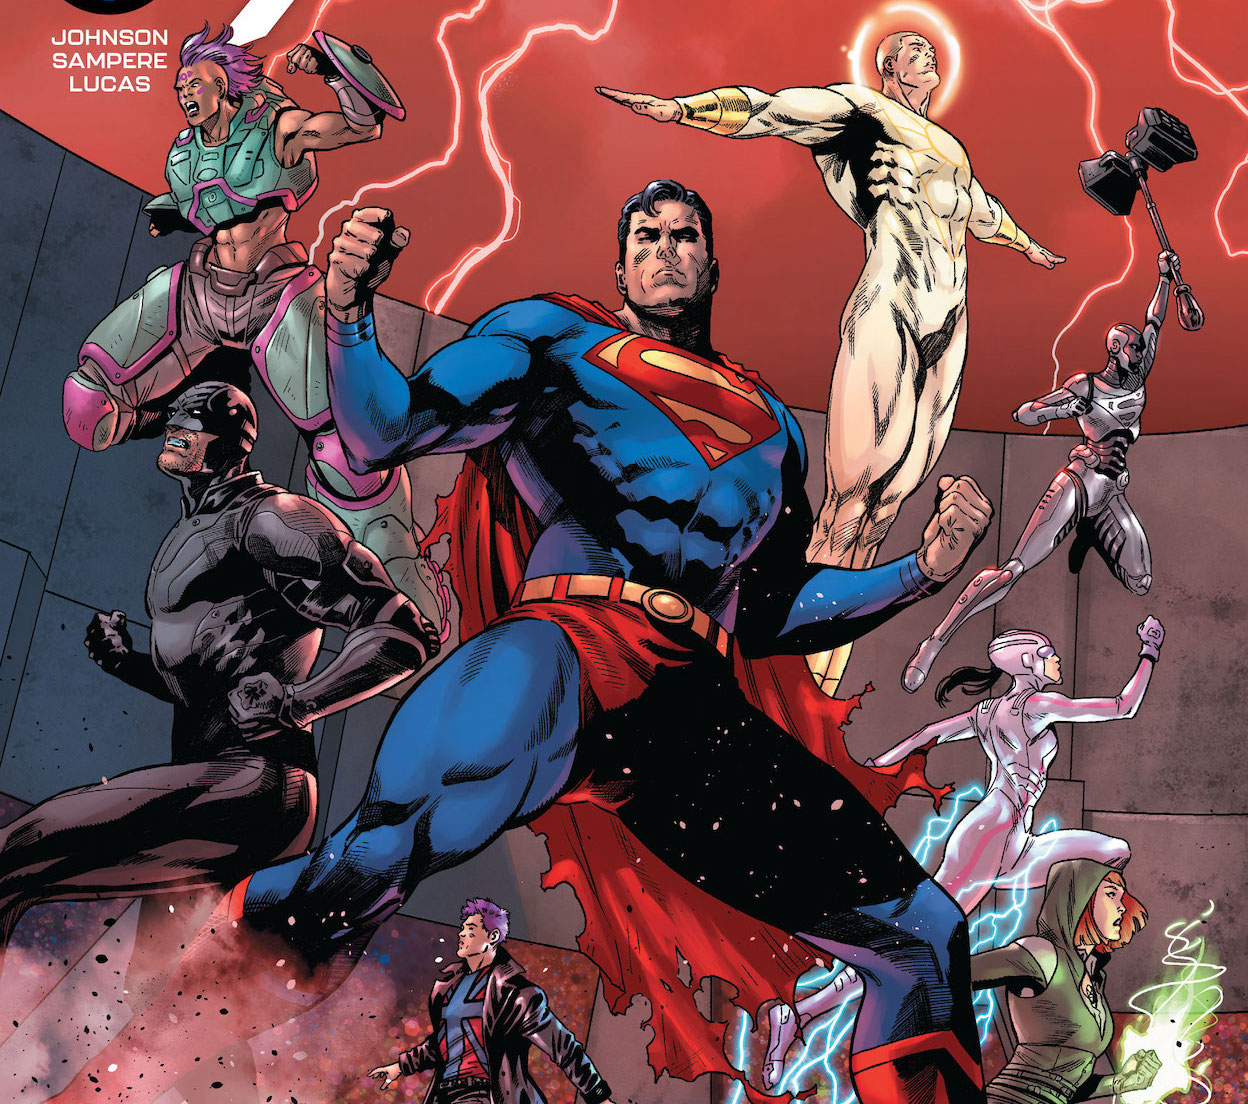 'Action Comics' #1036 is an impressive feat of worldbuilding